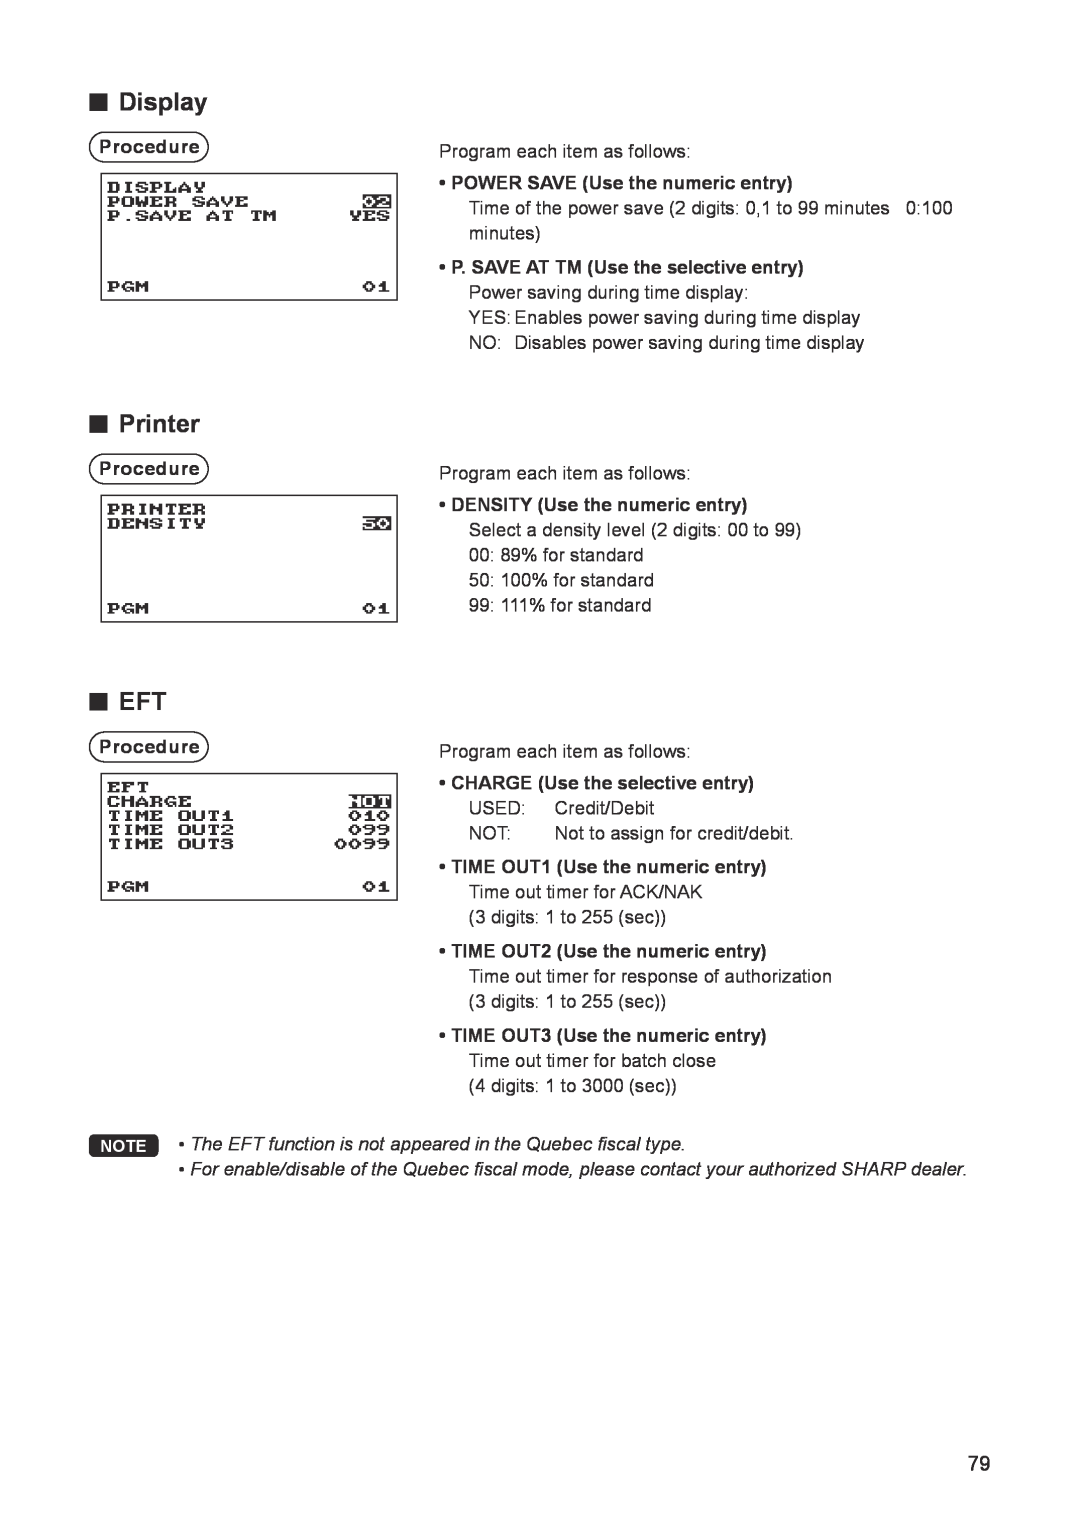 Sharp ER-A347A instruction manual Display, Printer, NOTE The EFT function is not appeared in the Quebec fiscal type 